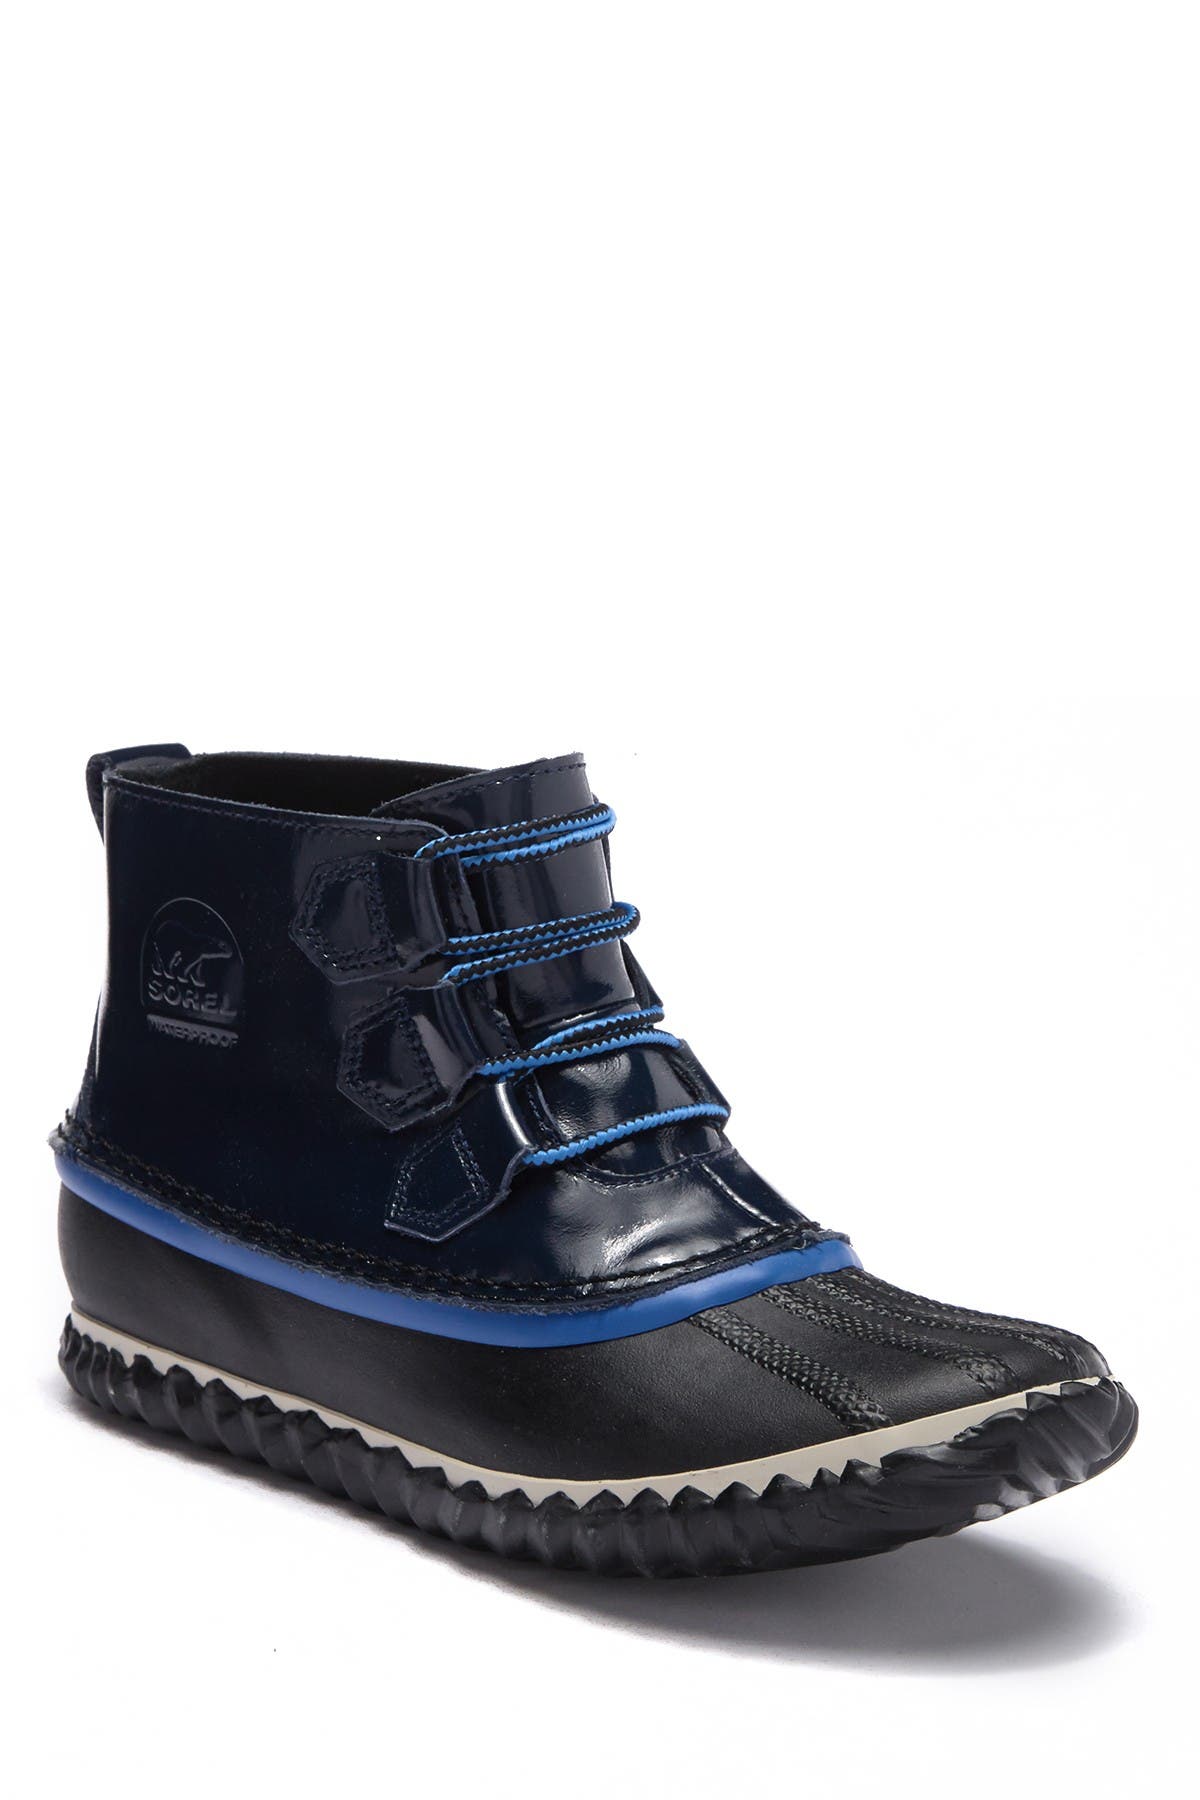 sorel out n about rain boot